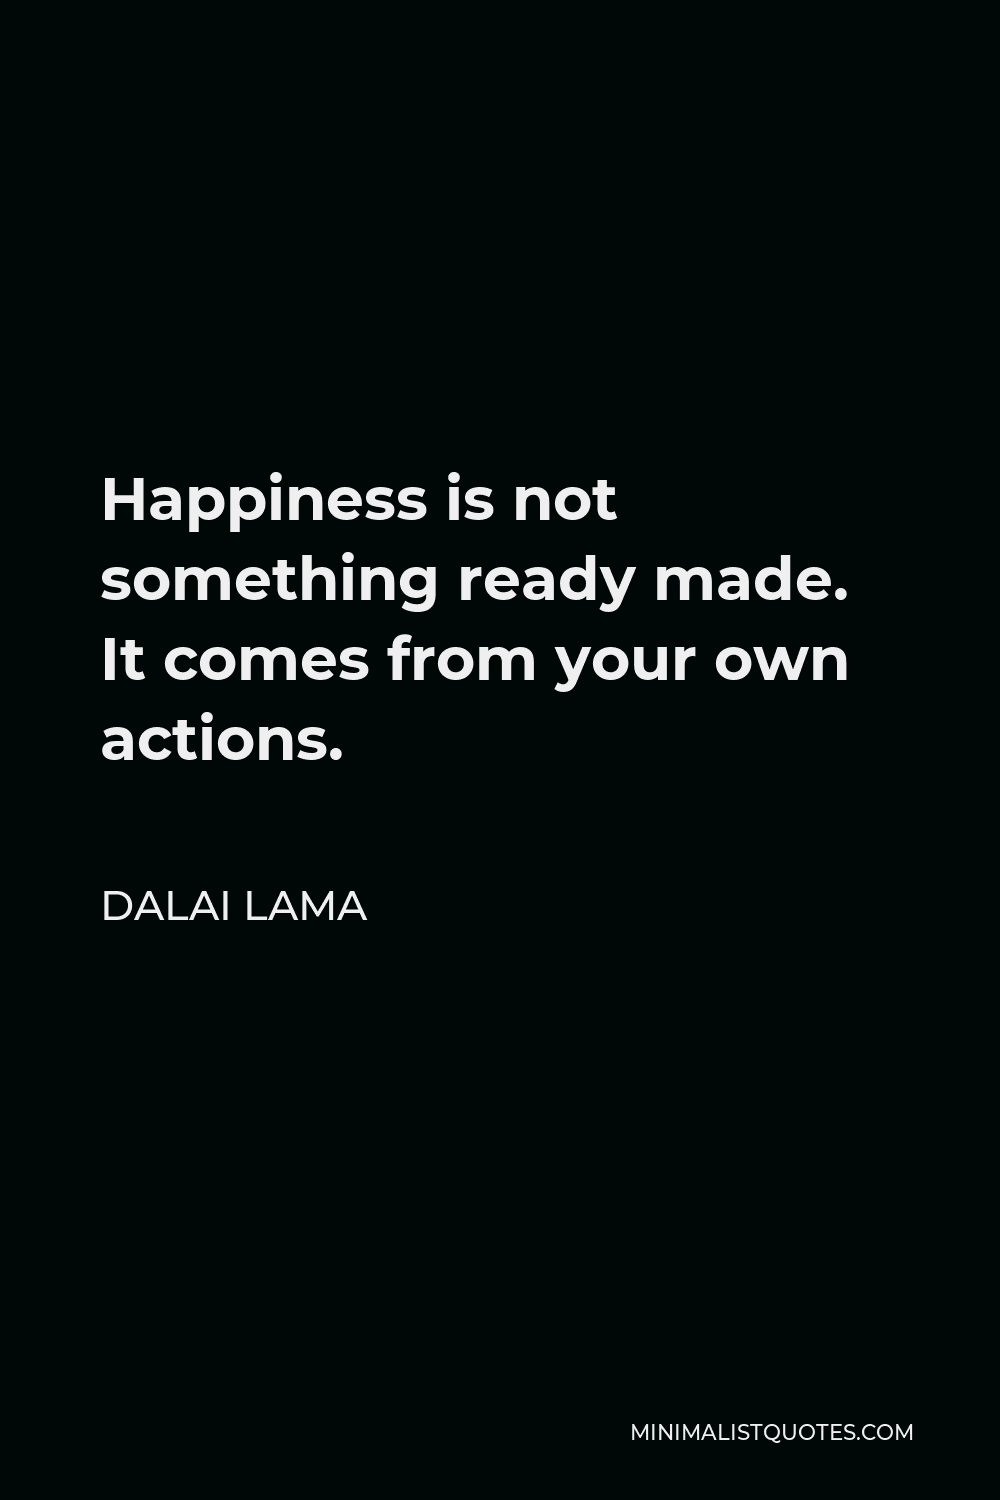 Dalai Lama Quote - Happiness is not something ready made. It comes from your own actions.